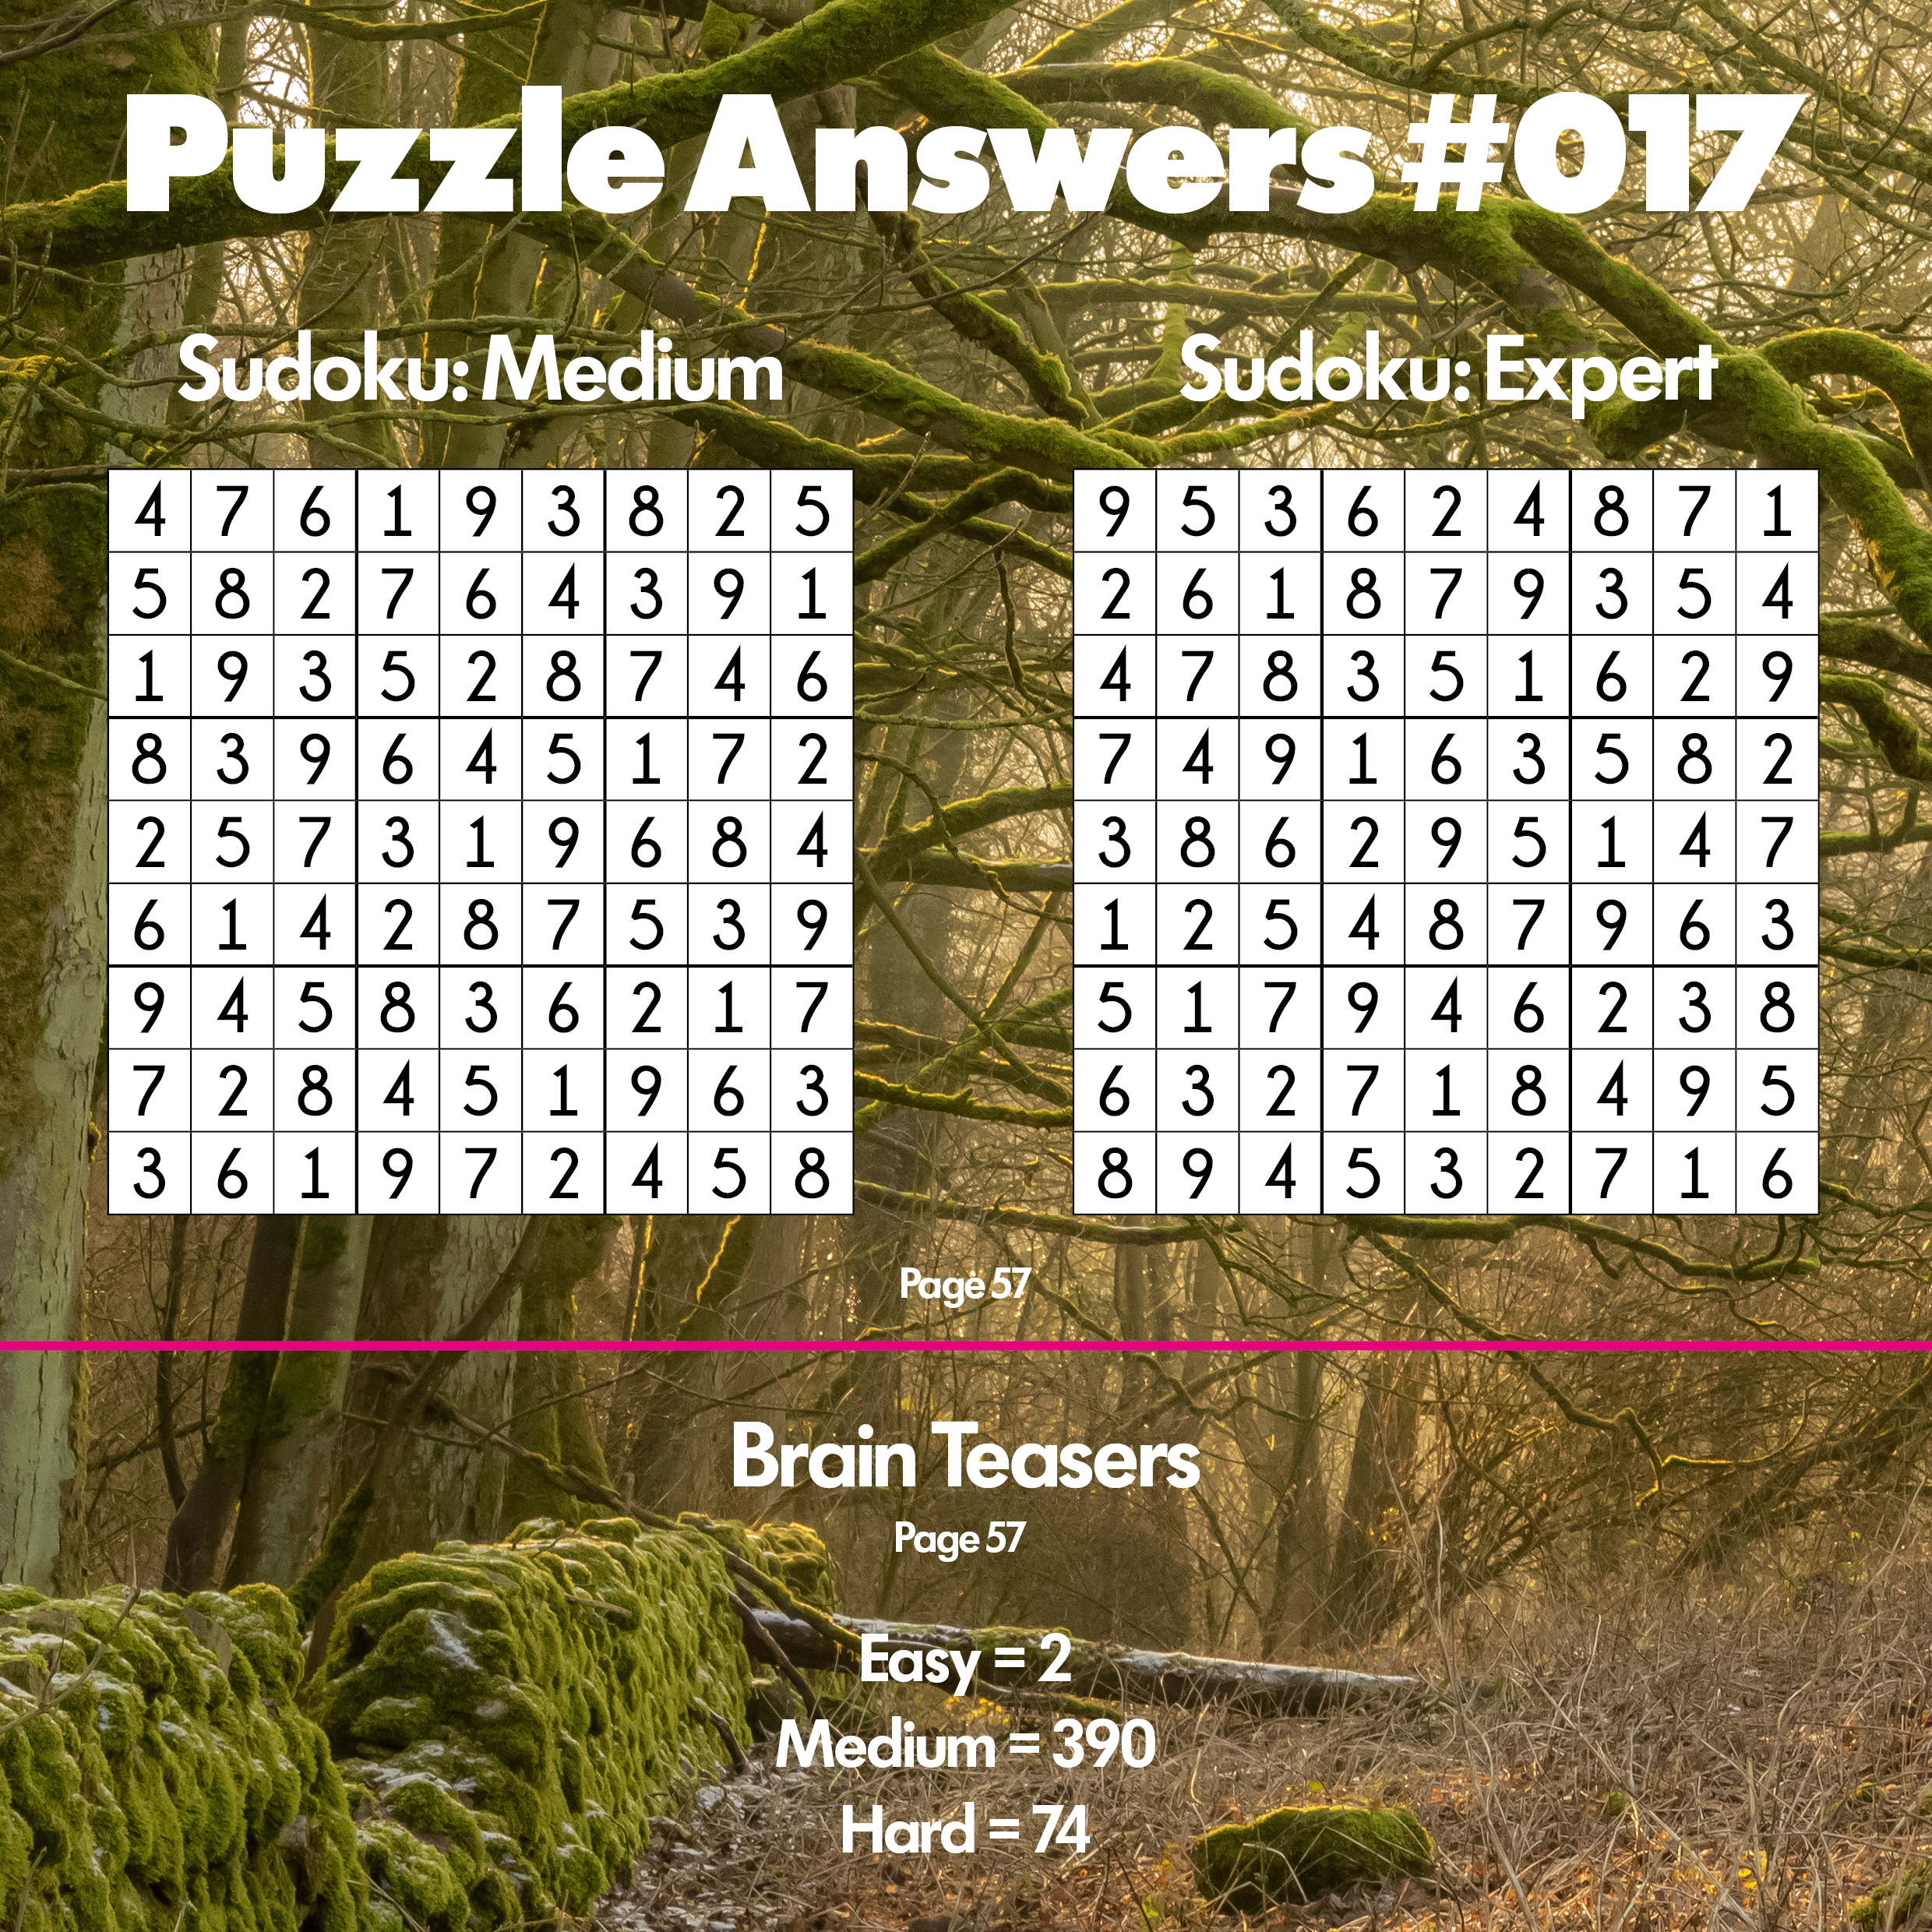 Issue #017 Answers